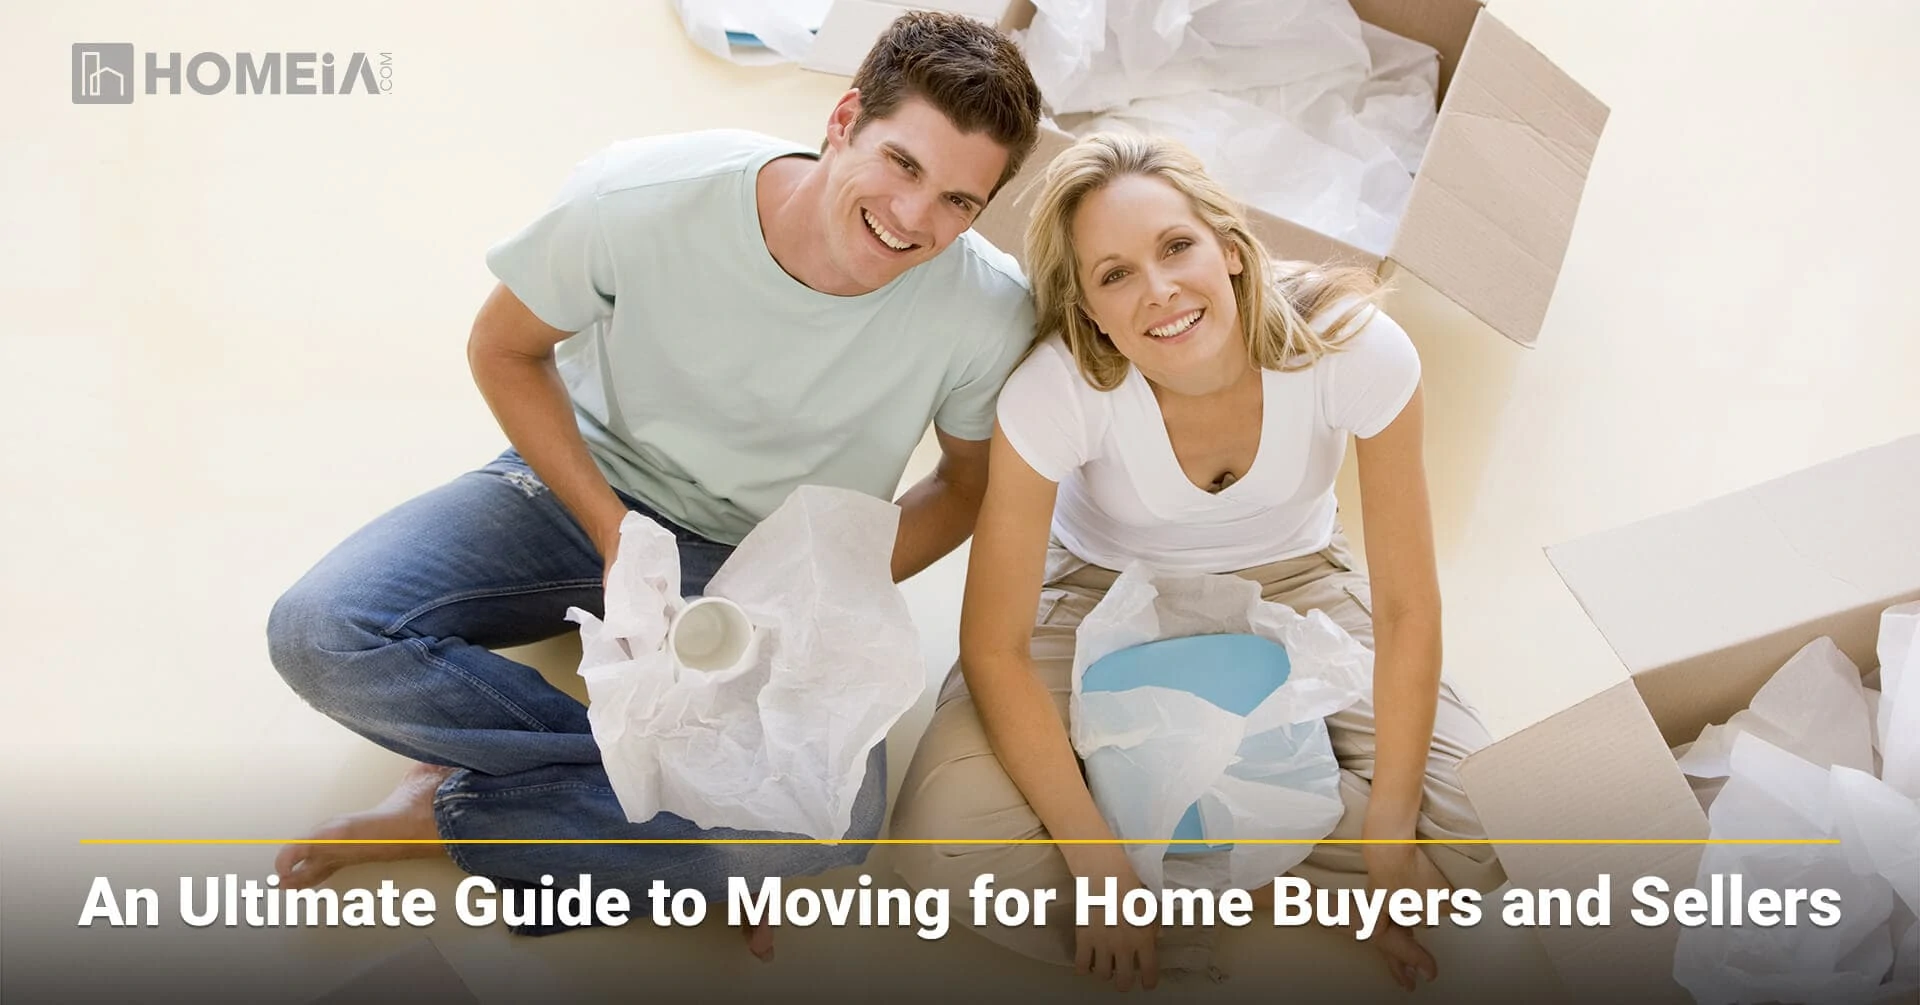 An Ultimate Guide to Moving for Home Buyers and Sellers